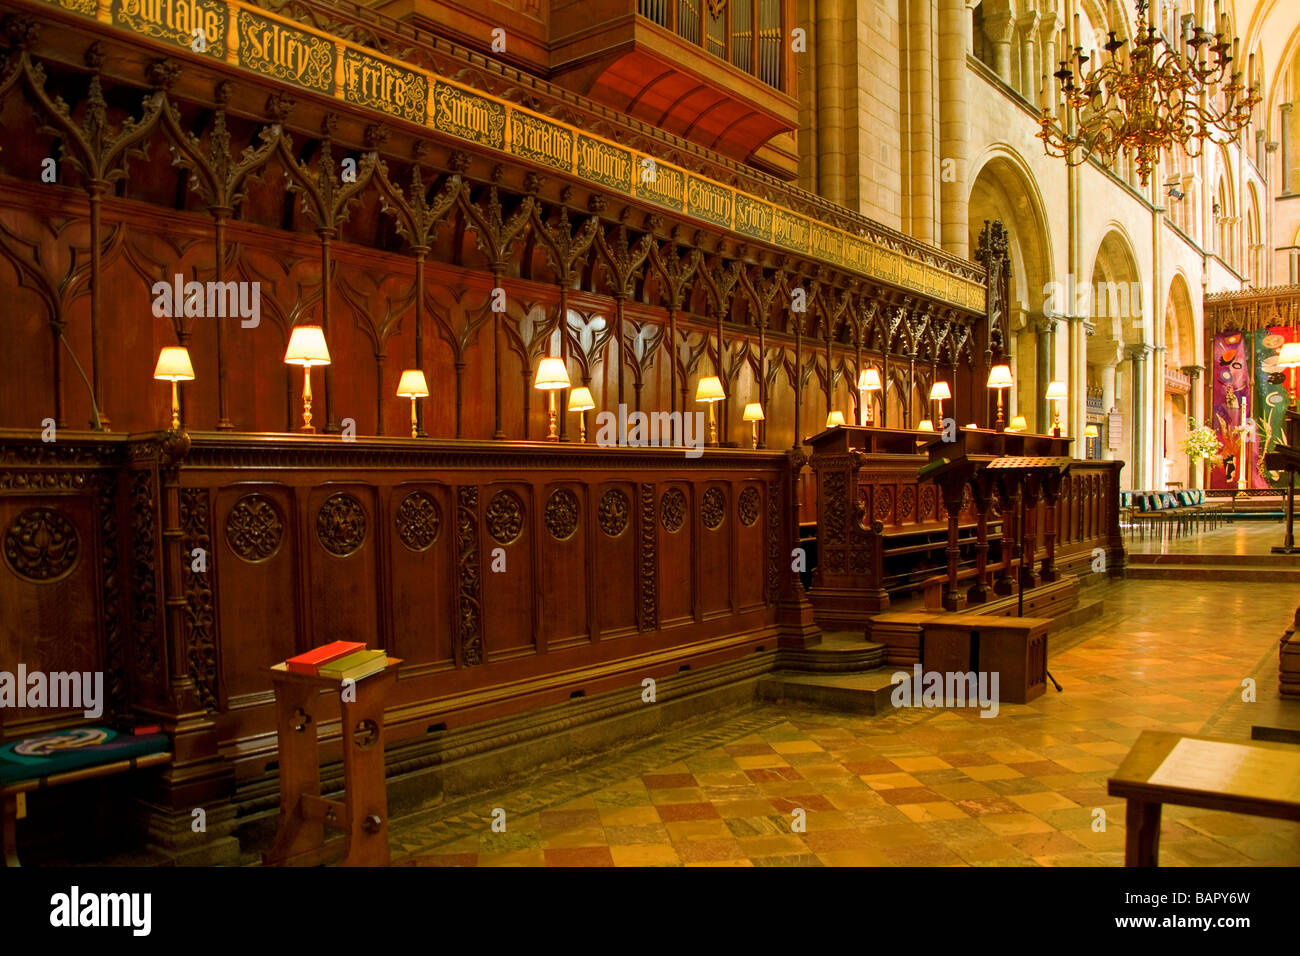 Choir stalls or The Quire in Chichester Cathedral, West Sussex, UK Stock Photo